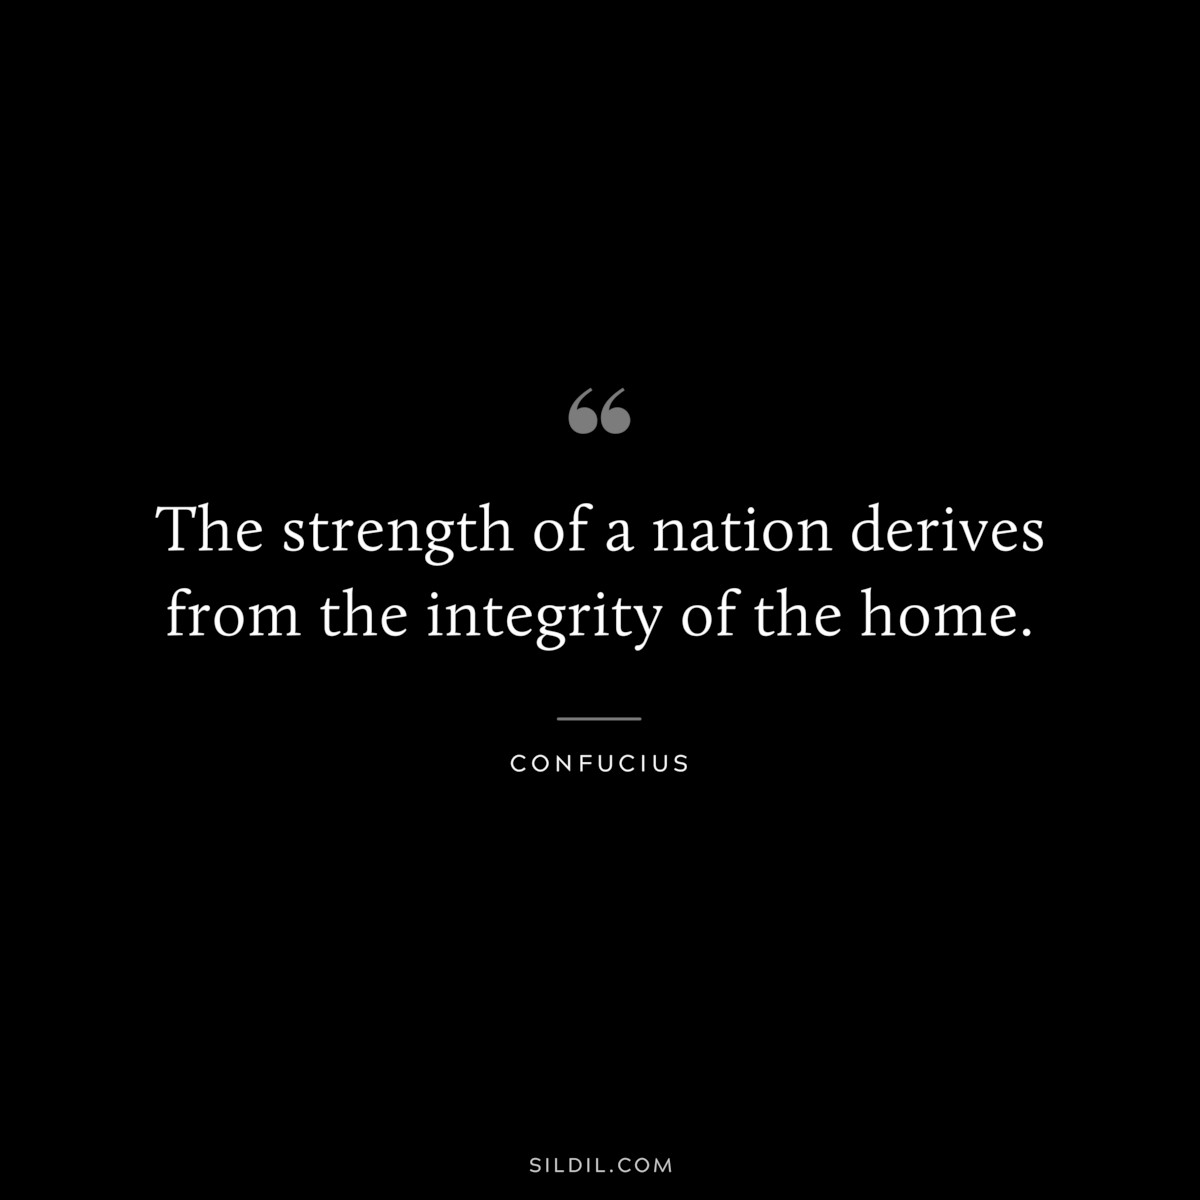 The strength of a nation derives from the integrity of the home. ― Confucius